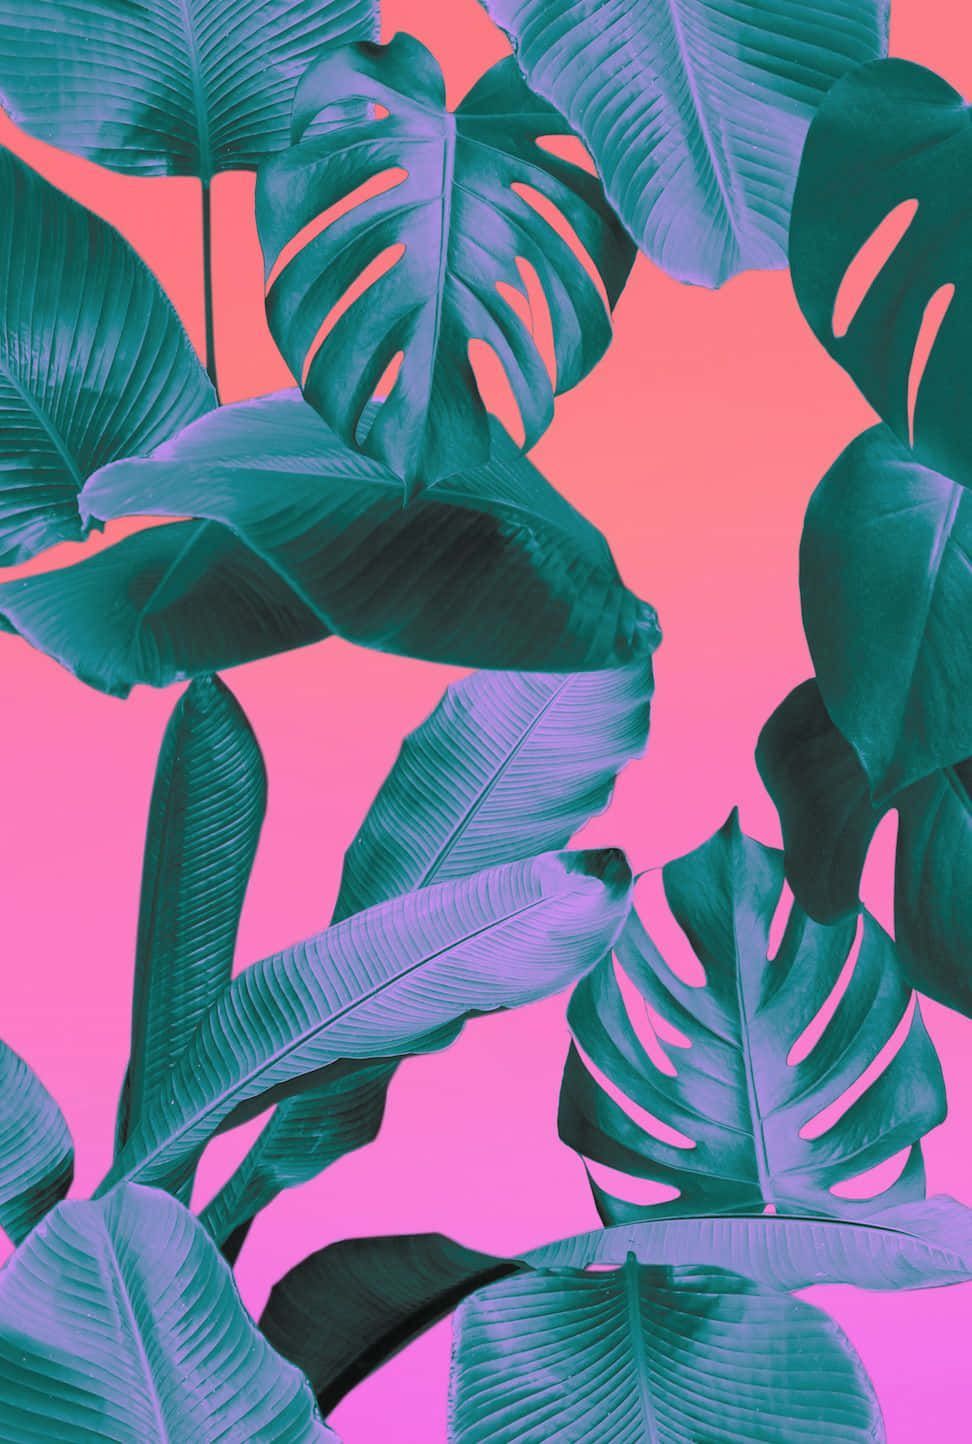 A tropical plant pattern on pink and purple background - Tropical, leaves, banana